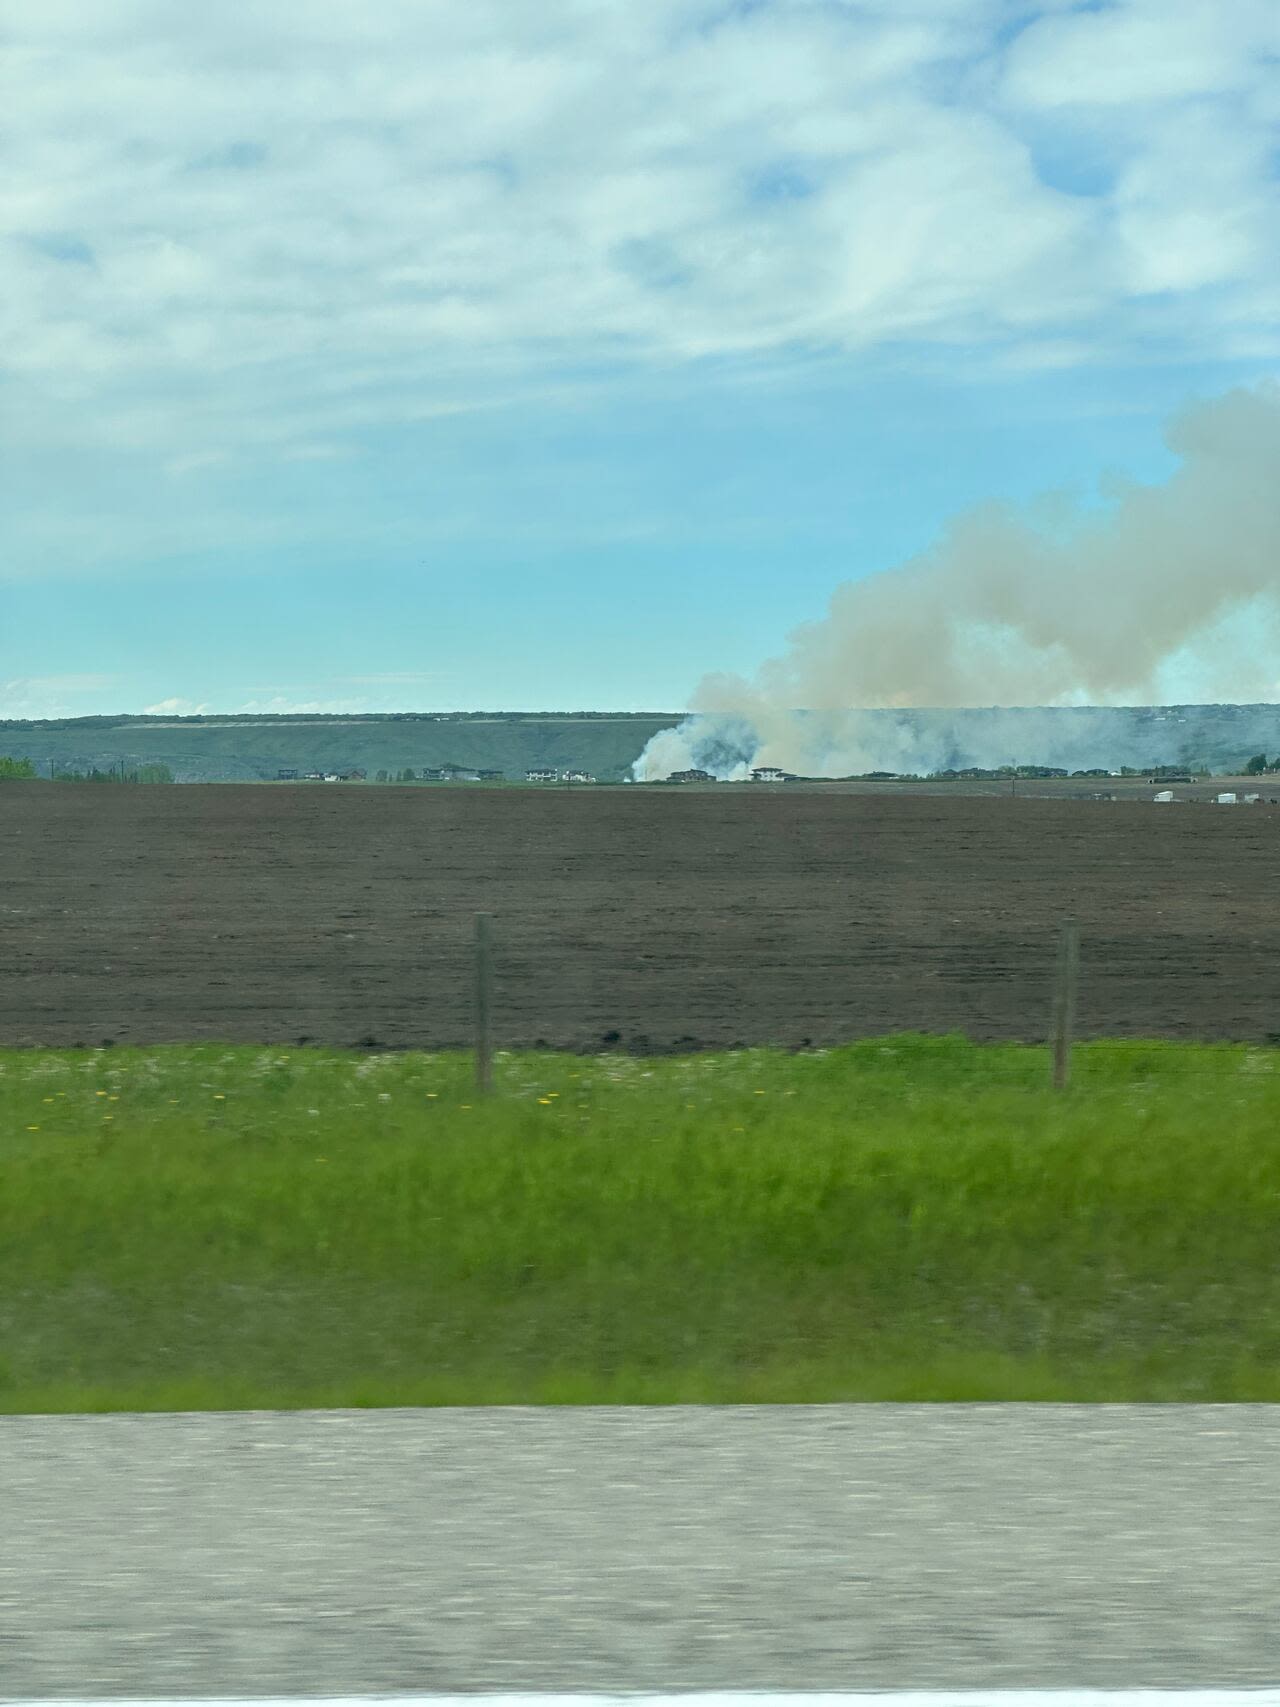 Grass fire in Springbank extinguished after threatening nearby community